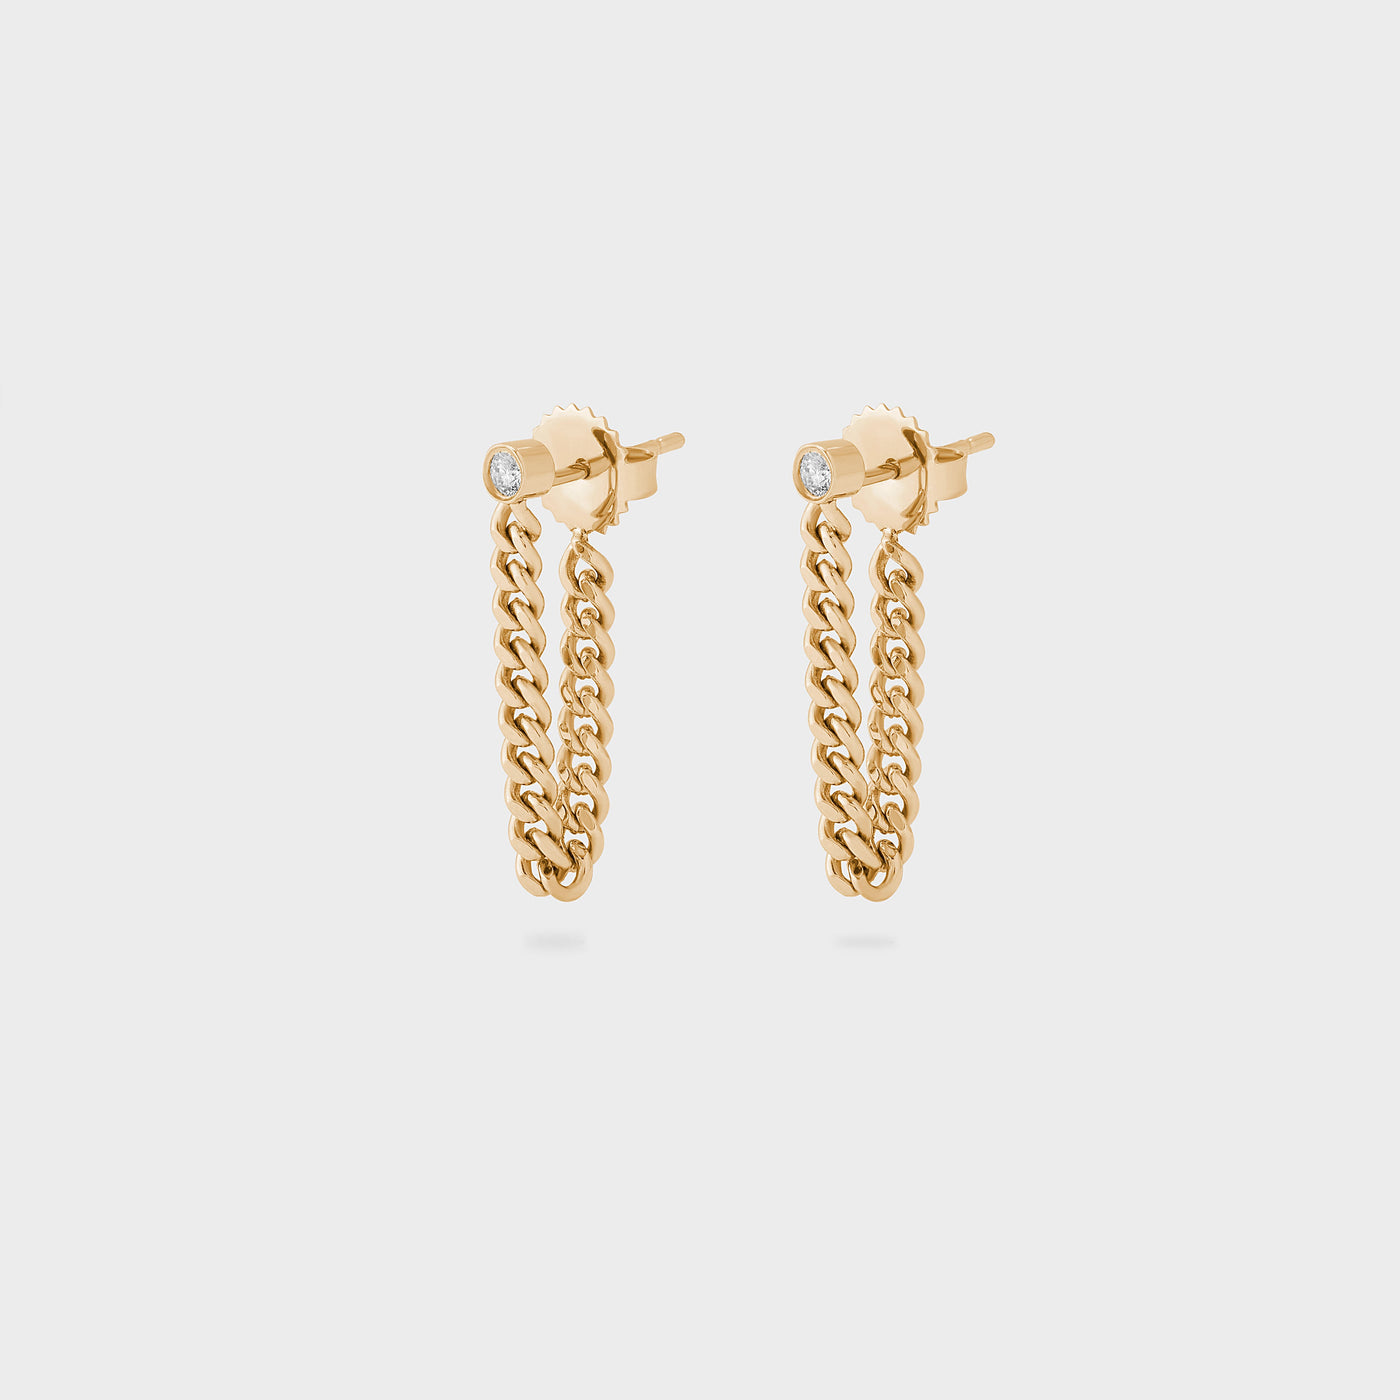 Chelsea Chain Studs - In Stock